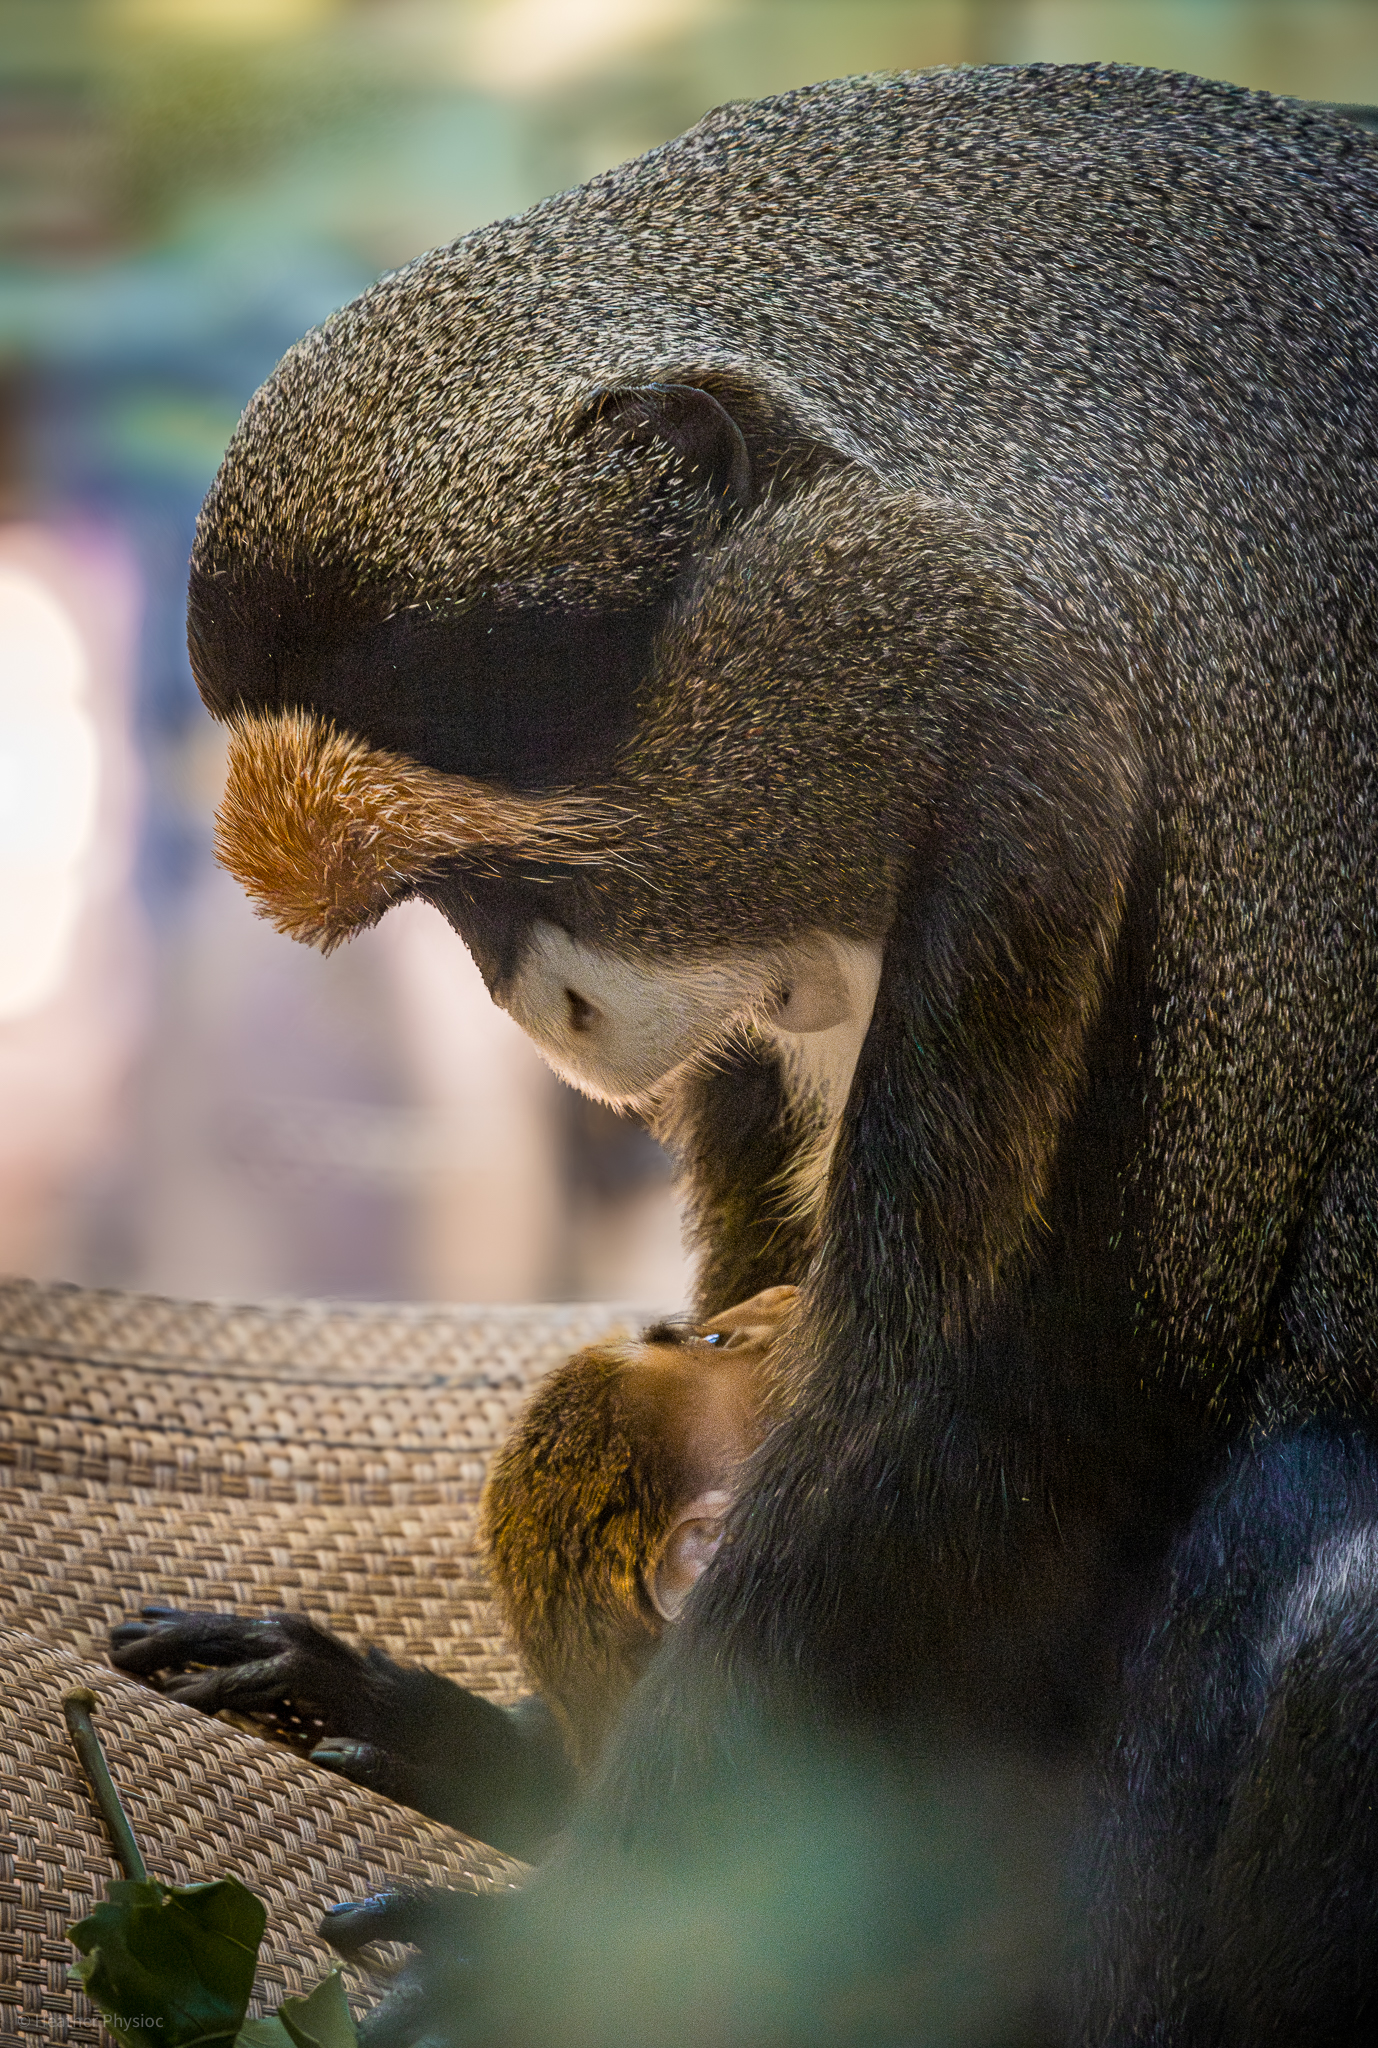 The first rare De Brazza's monkey to be born at the San Diego Zoo 